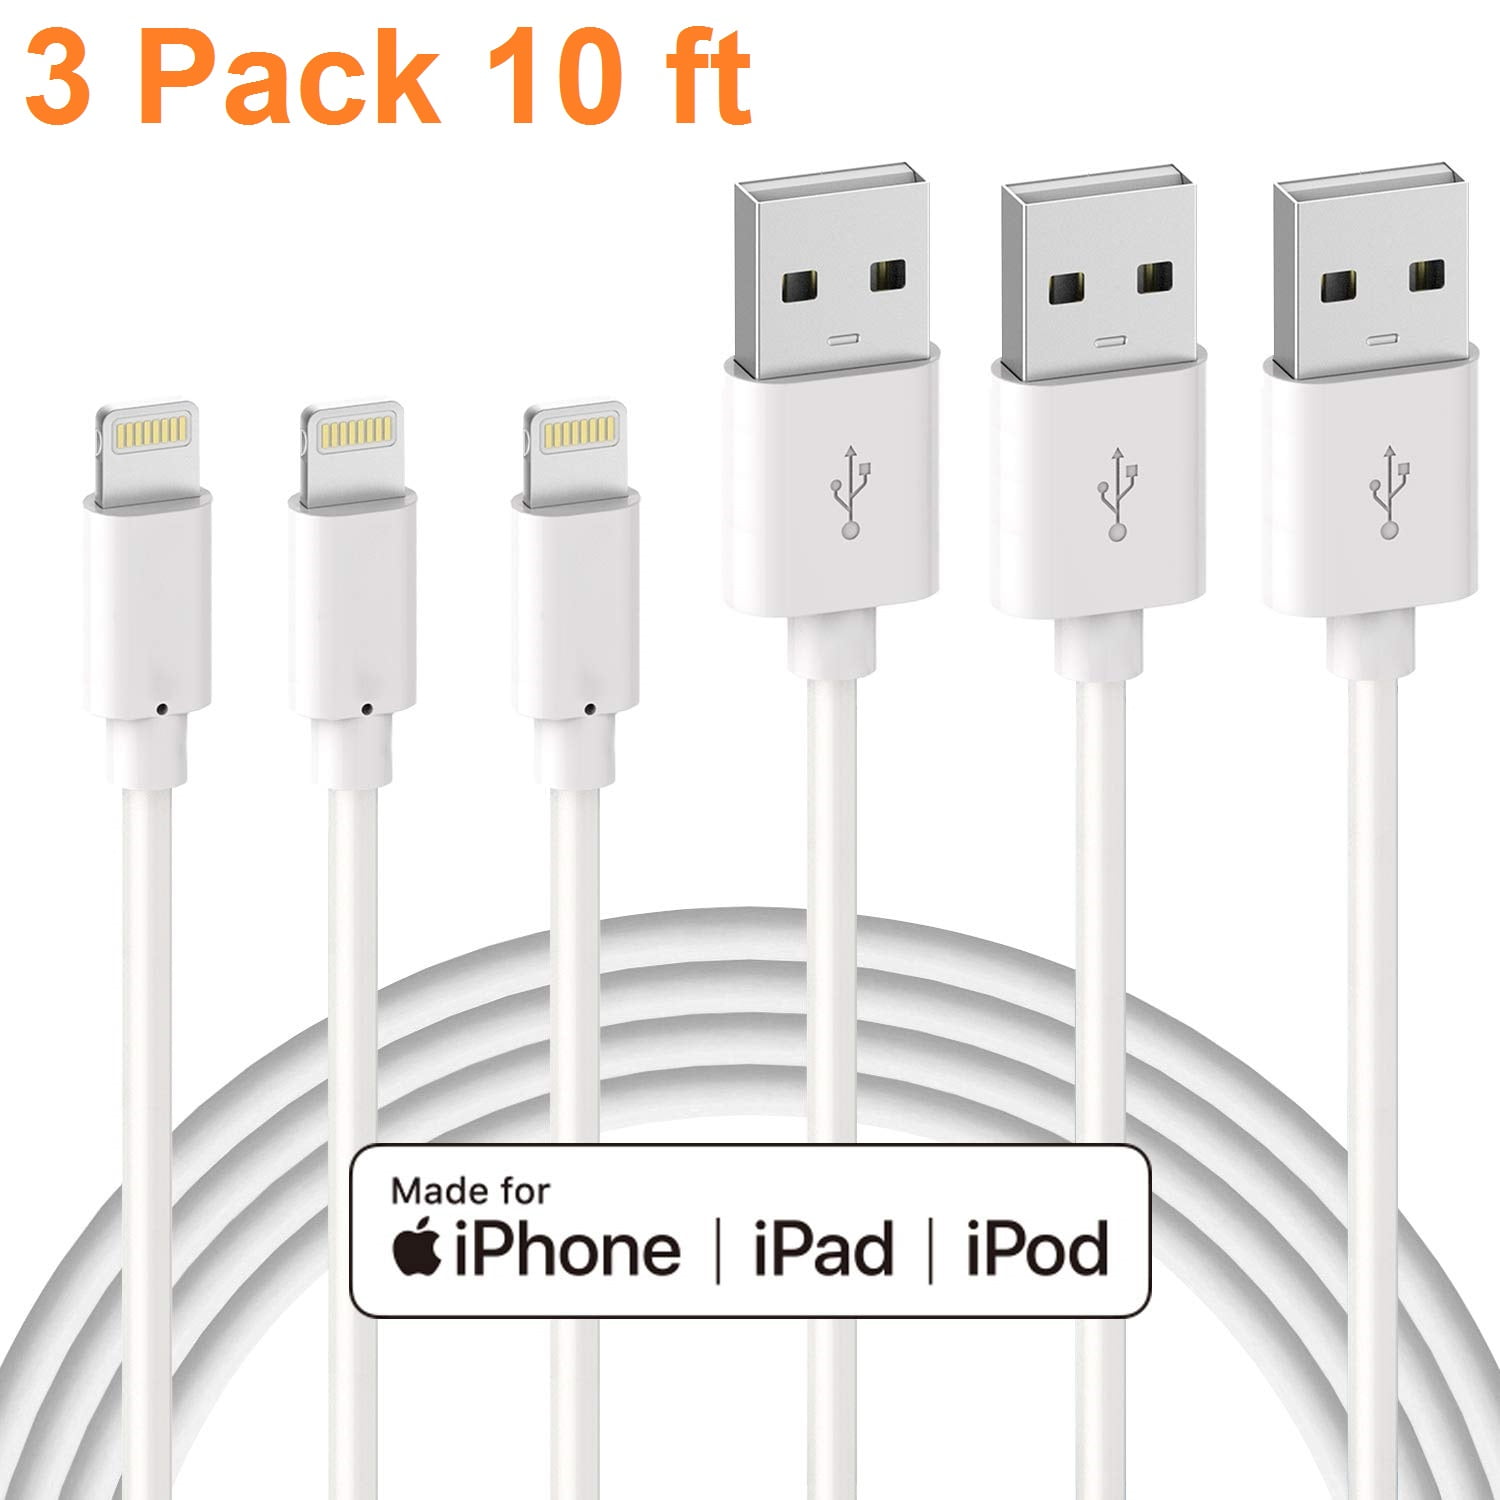 Fast Charging & Syncing Cord Compatible with iPhone 11,Pro,Pro Max,Xs,Xs Max,XR,X,8,8 Plus,7,7 Plus,6S,6S Plus,iPad Air,Mini/iPod Touch/Case Truwire iPhone Cable Set 2 Pack 3FT USB Cable 